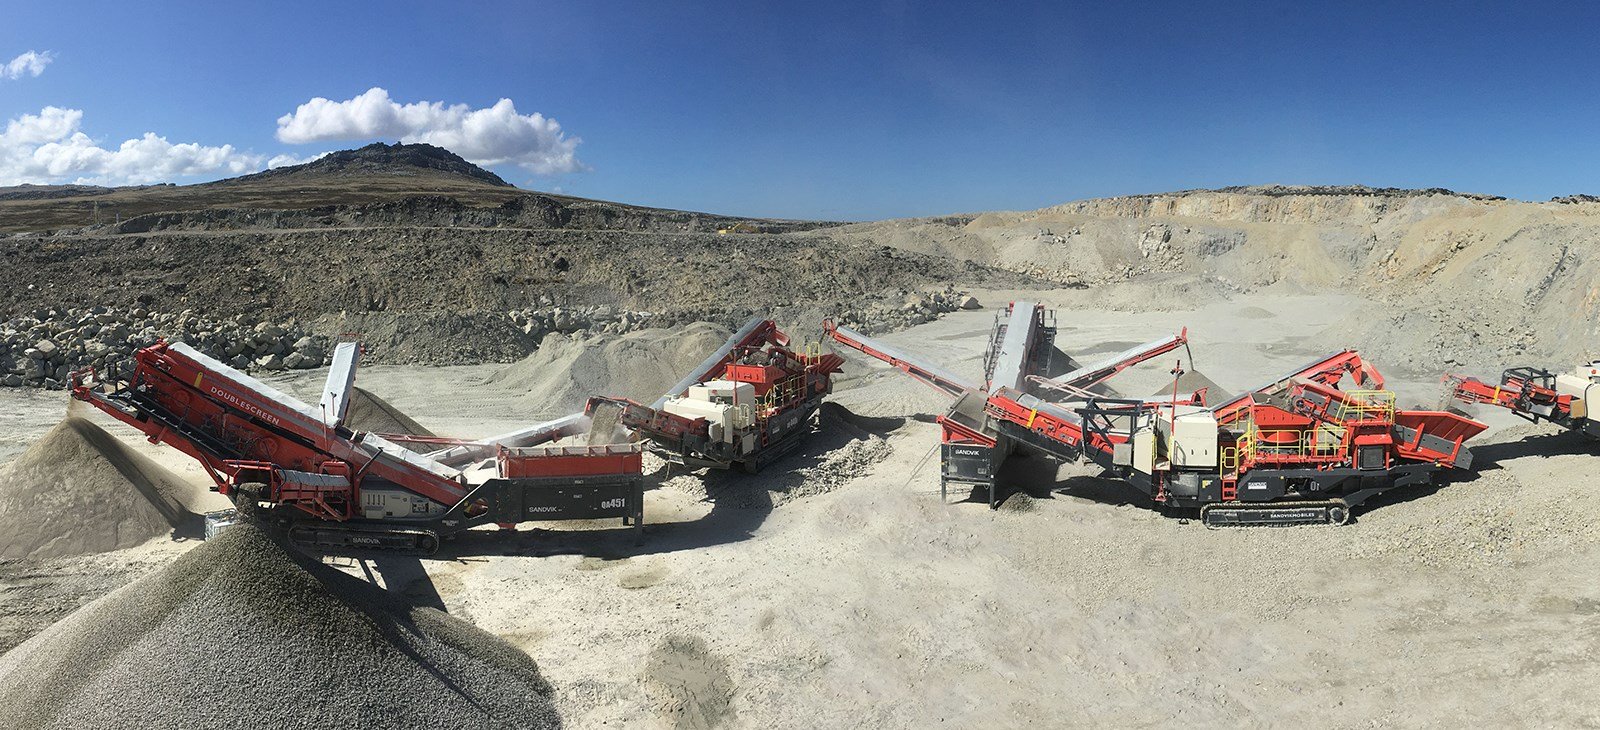 The Sandvik crushing and screening train in action at Pony's Pass, East Falkland